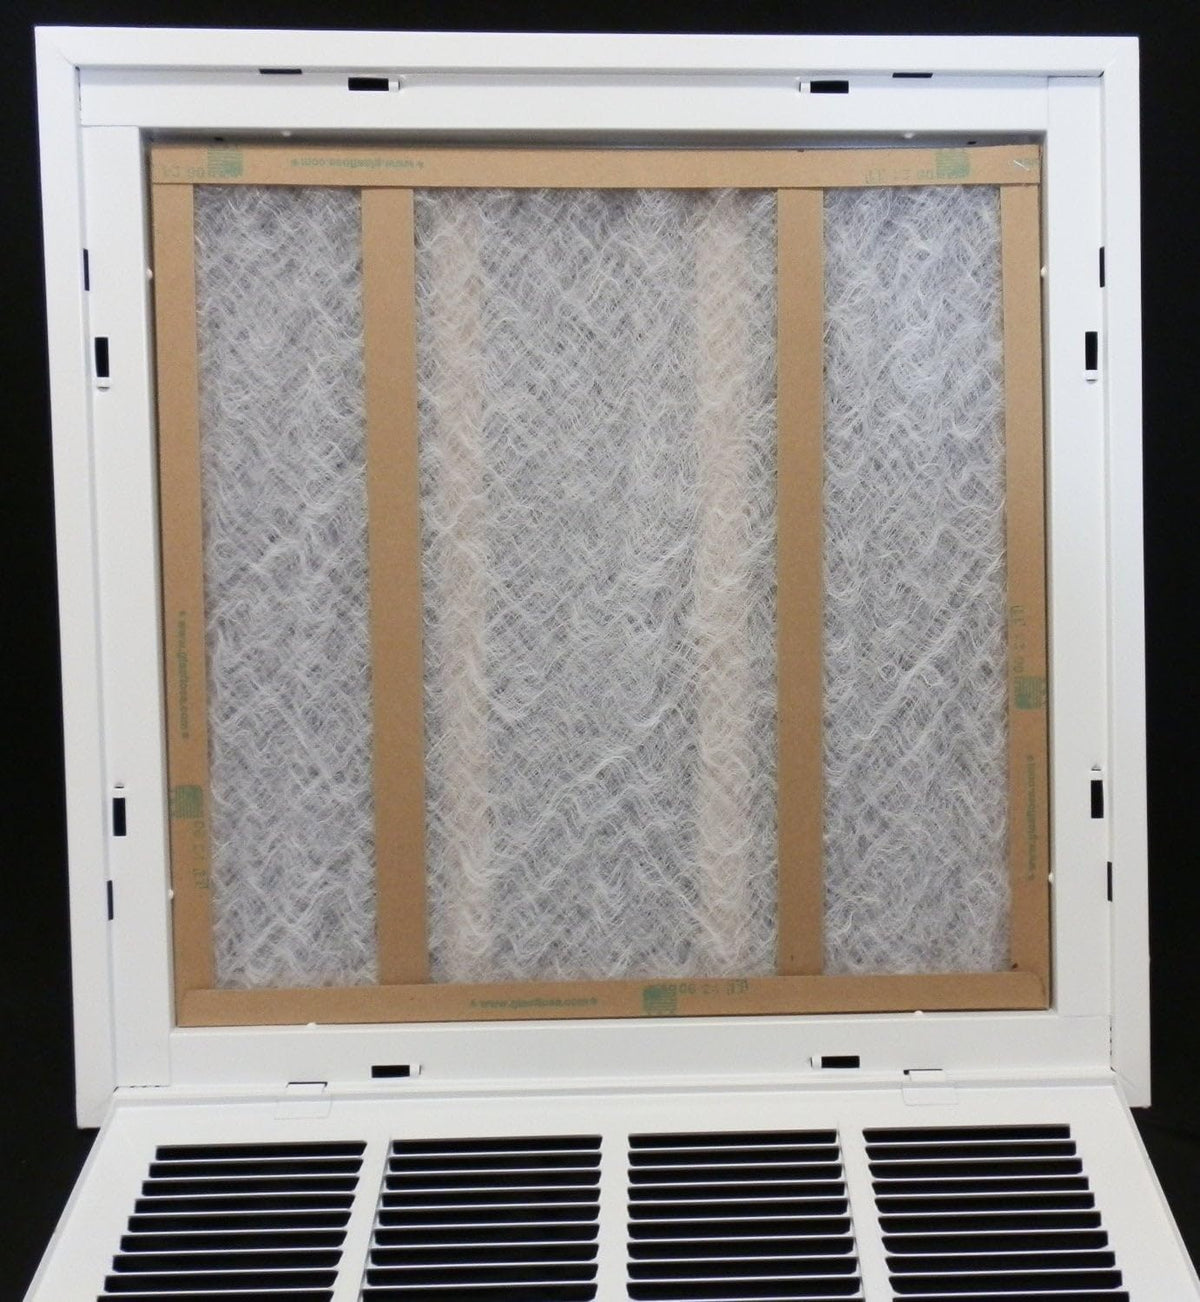 20&quot; X 12&quot; Steel Return Air Filter Grille for 1&quot; Filter - Removable Frame - [Outer Dimensions: 22 5/8&quot; X 14 5/8&quot;]